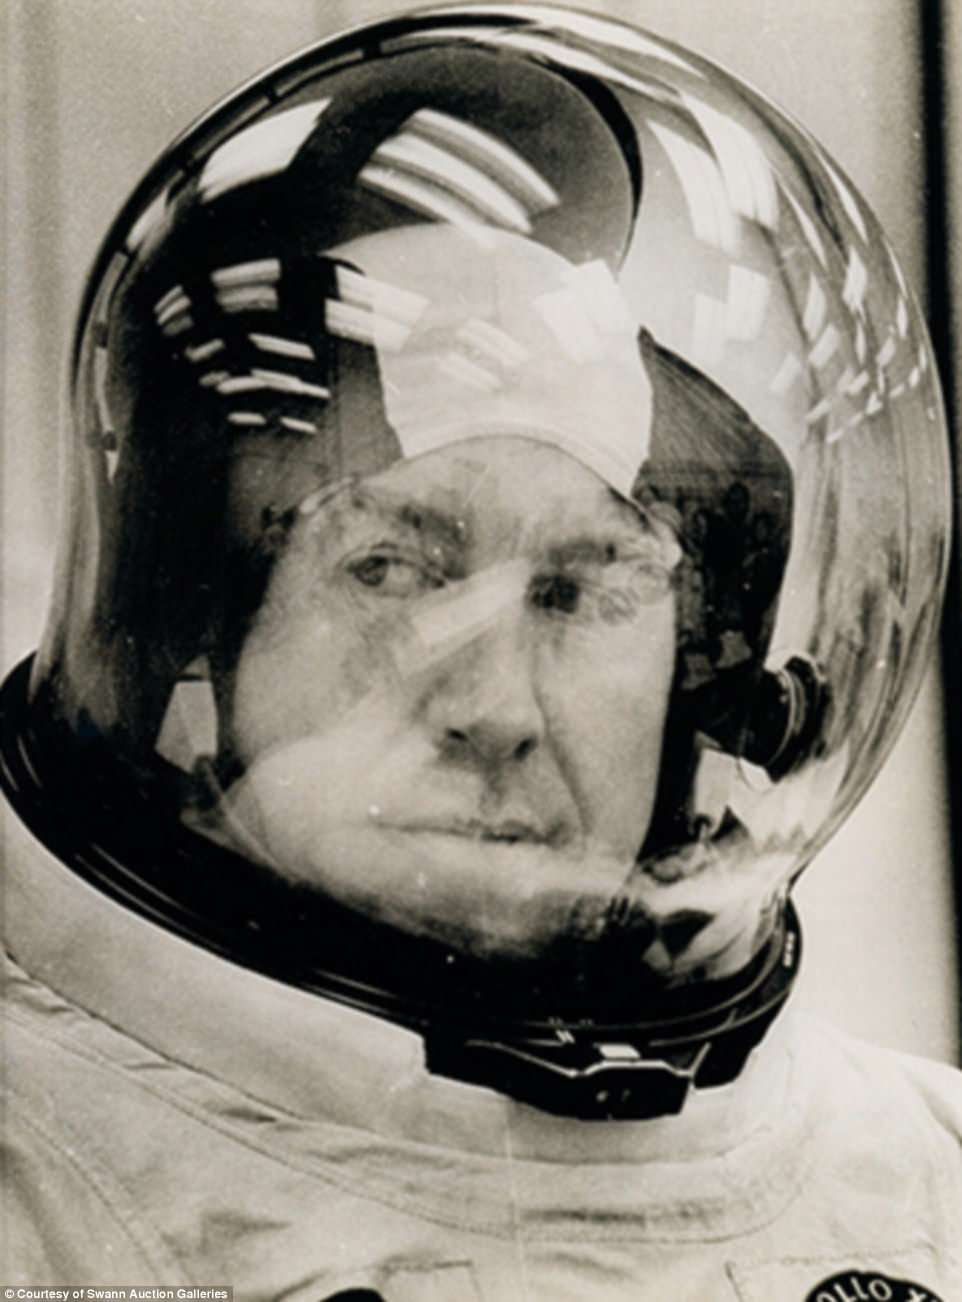 Pictured is a close-up of flight commander Jim Lovell prior to Apollo 13's launch.  The mission is famous for the line 'Houston, we have had a problem here', which is often misquoted as 'Houston, we have a problem'